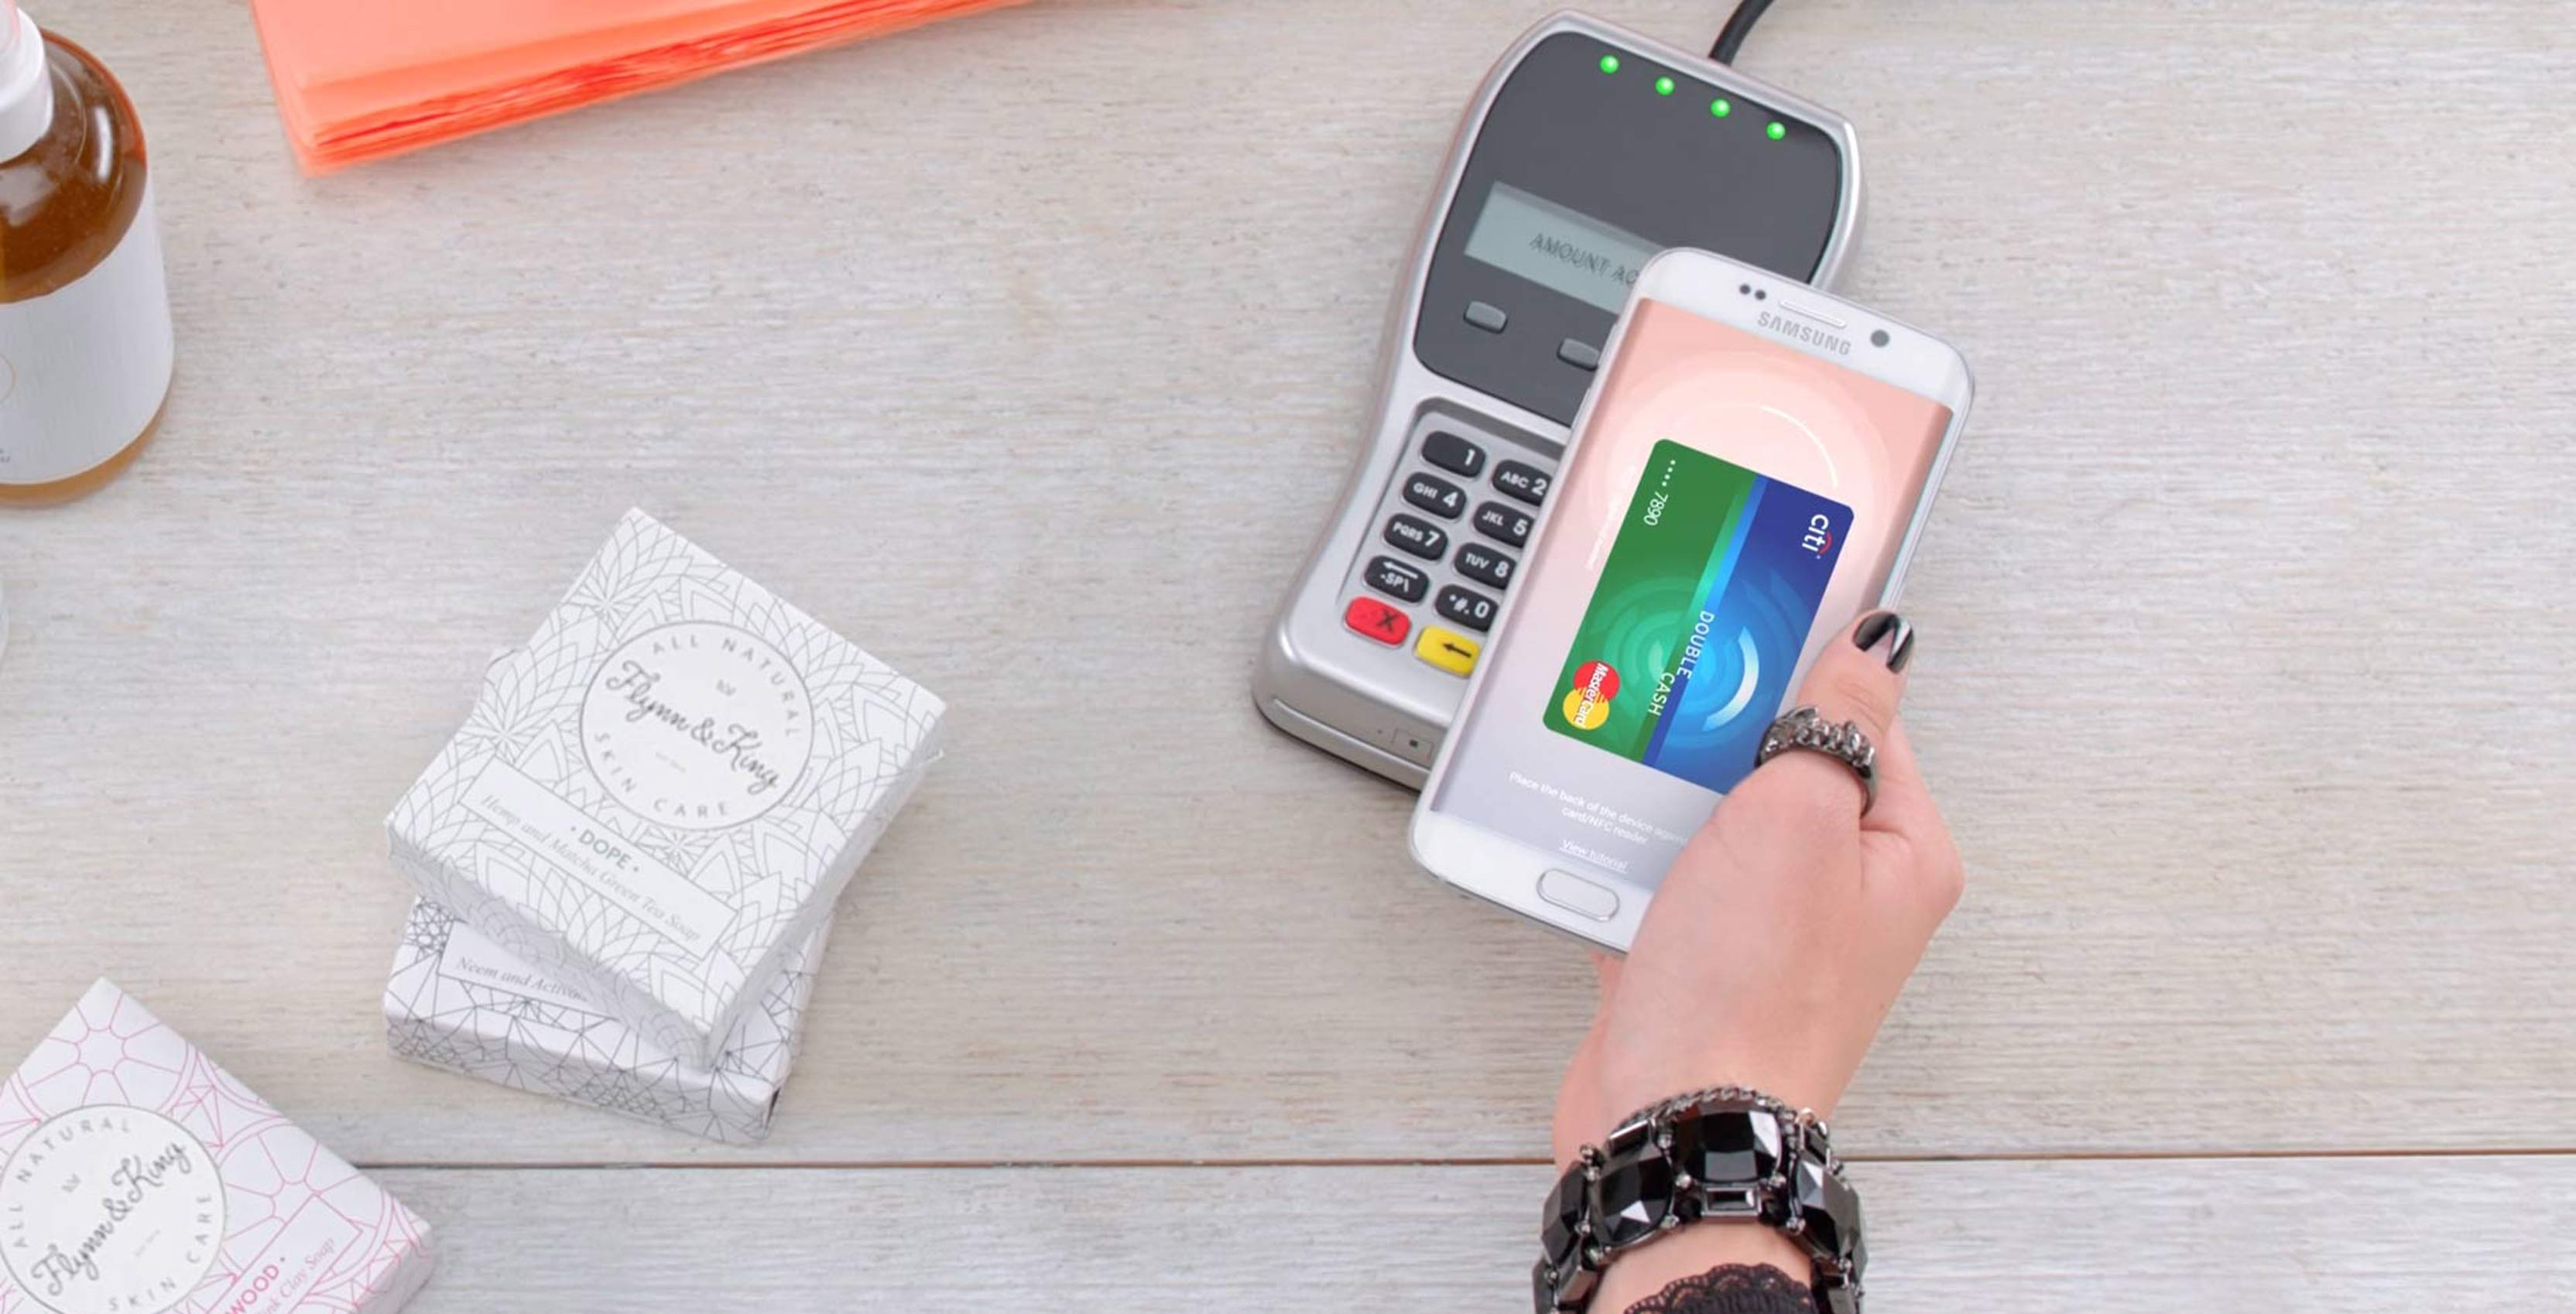 Samsung Pay now works with Scotiabank and ATB Financial